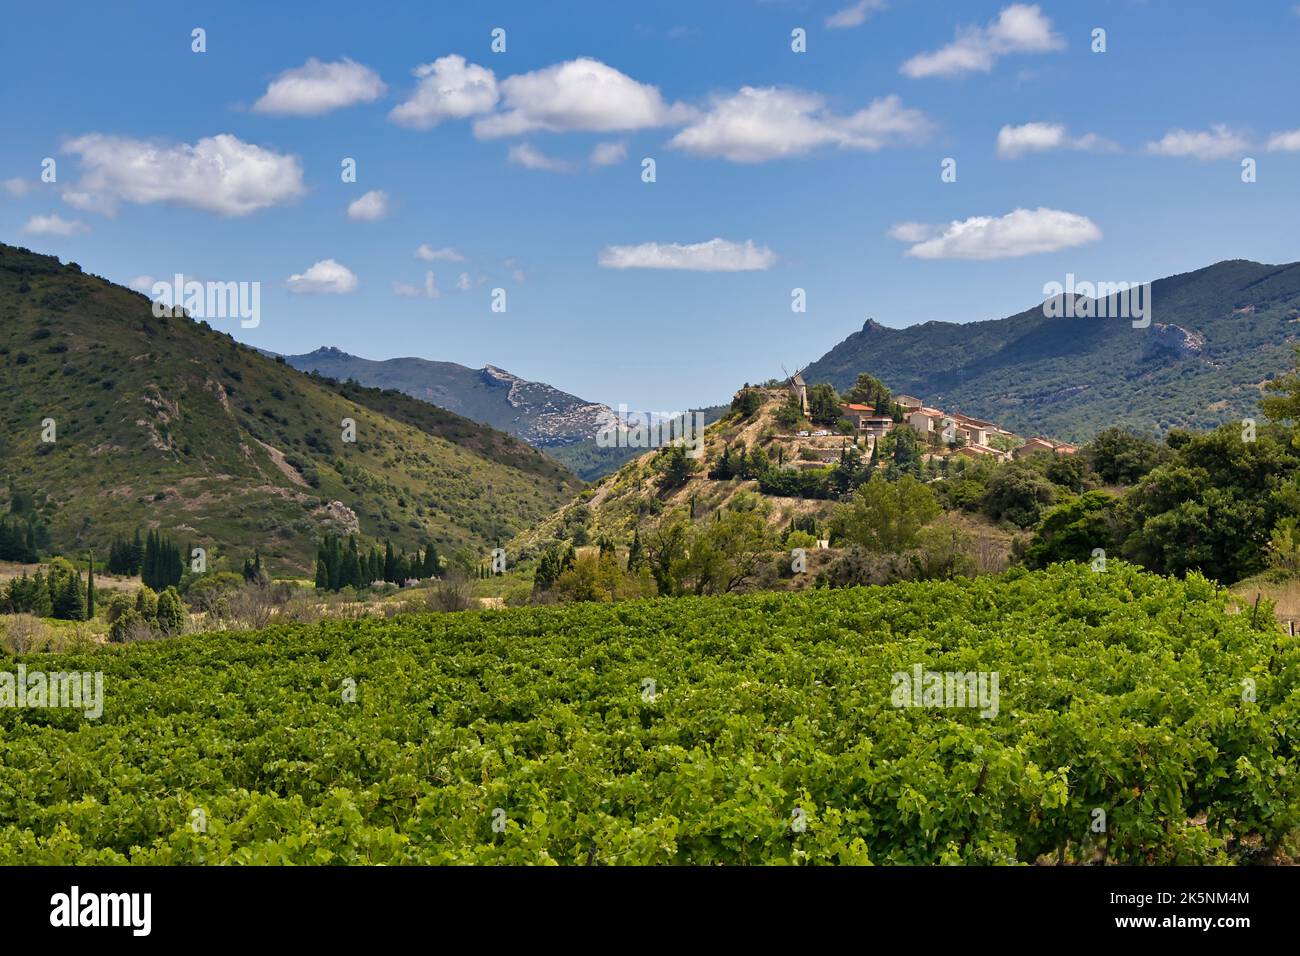 Village surrounded by wine field Stock Photo